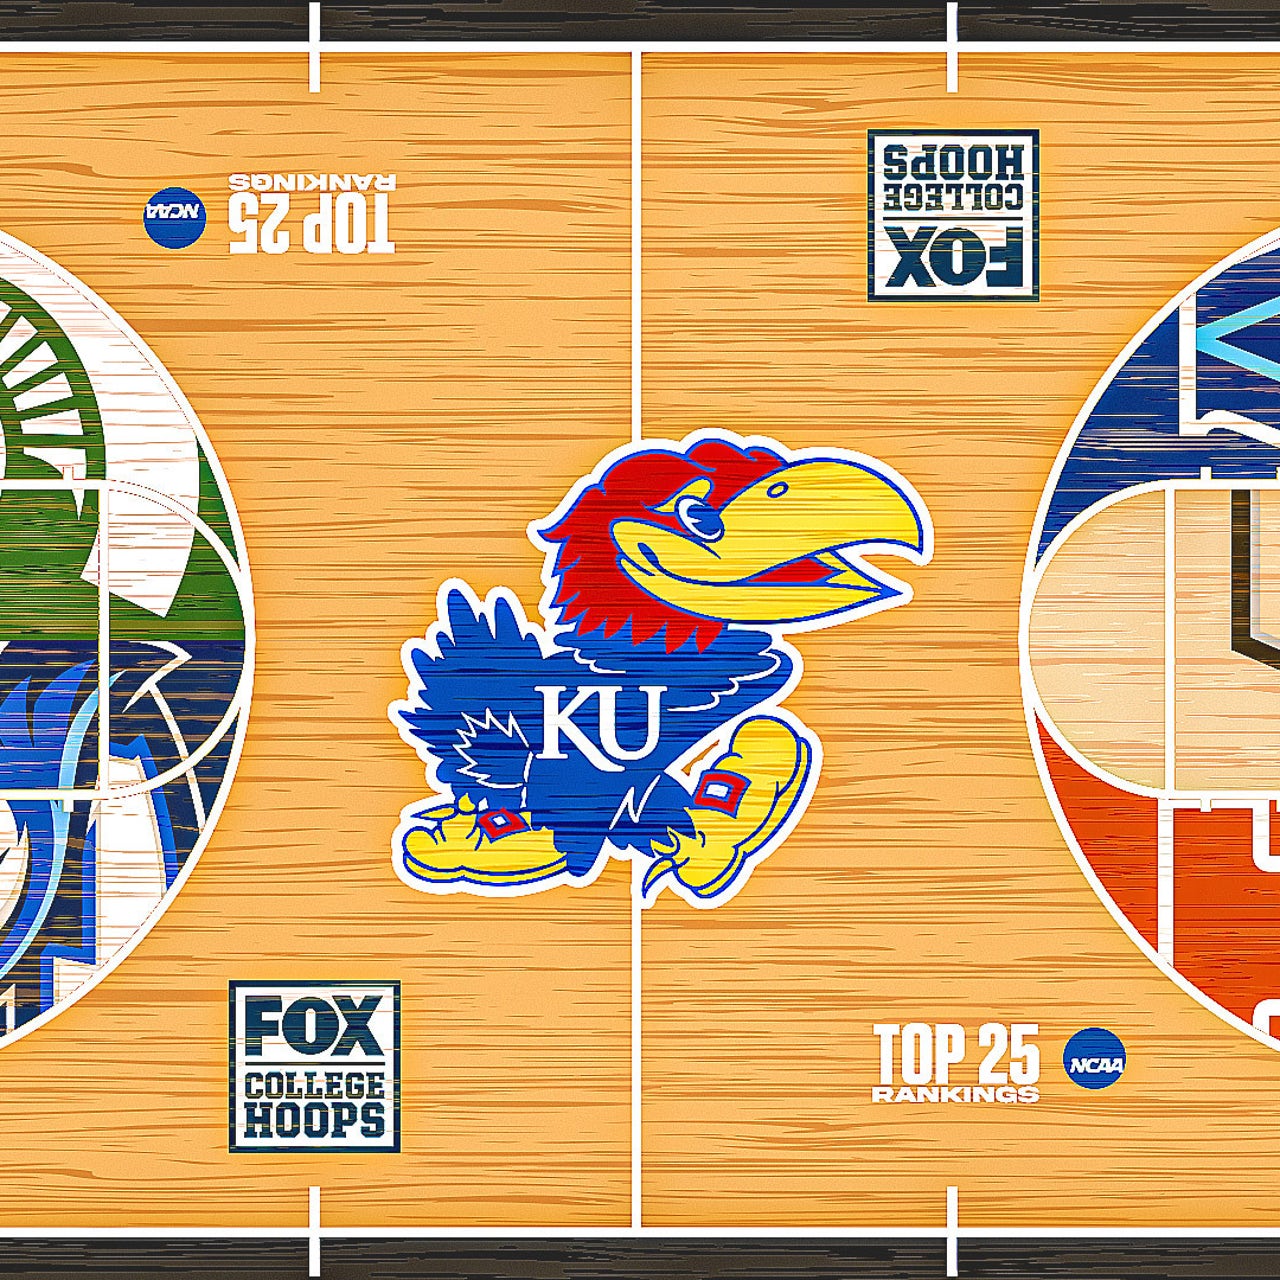 College Basketball Best Bets: Our Staff's 4 Top Selections for